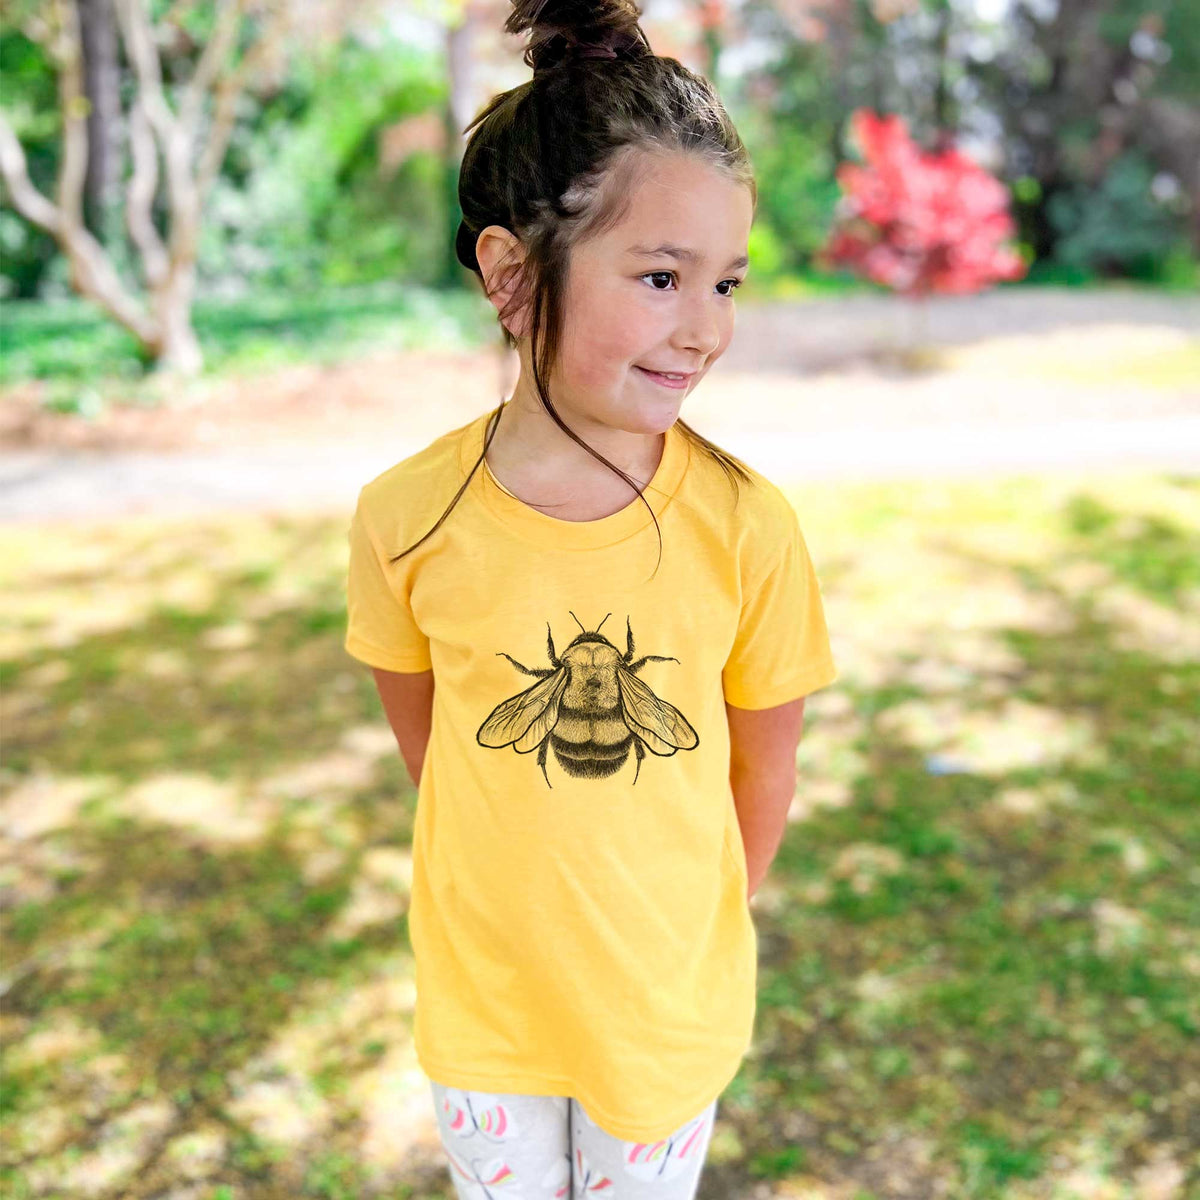 Bombus Affinis - Rusty-Patched Bumble Bee - Kids Shirt